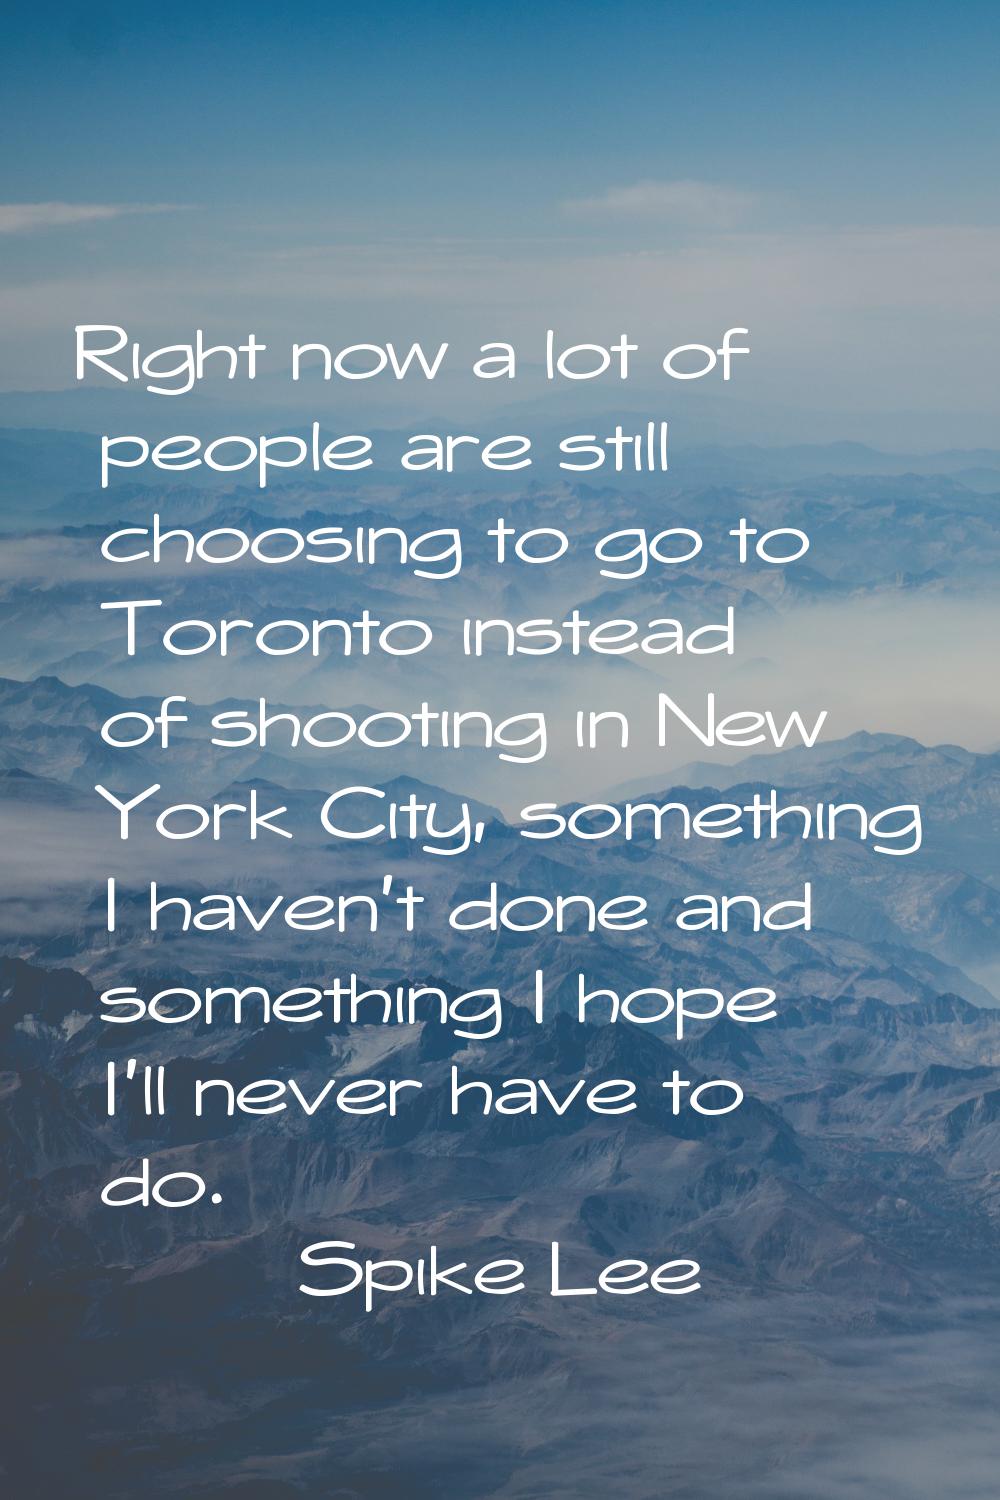 Right now a lot of people are still choosing to go to Toronto instead of shooting in New York City,